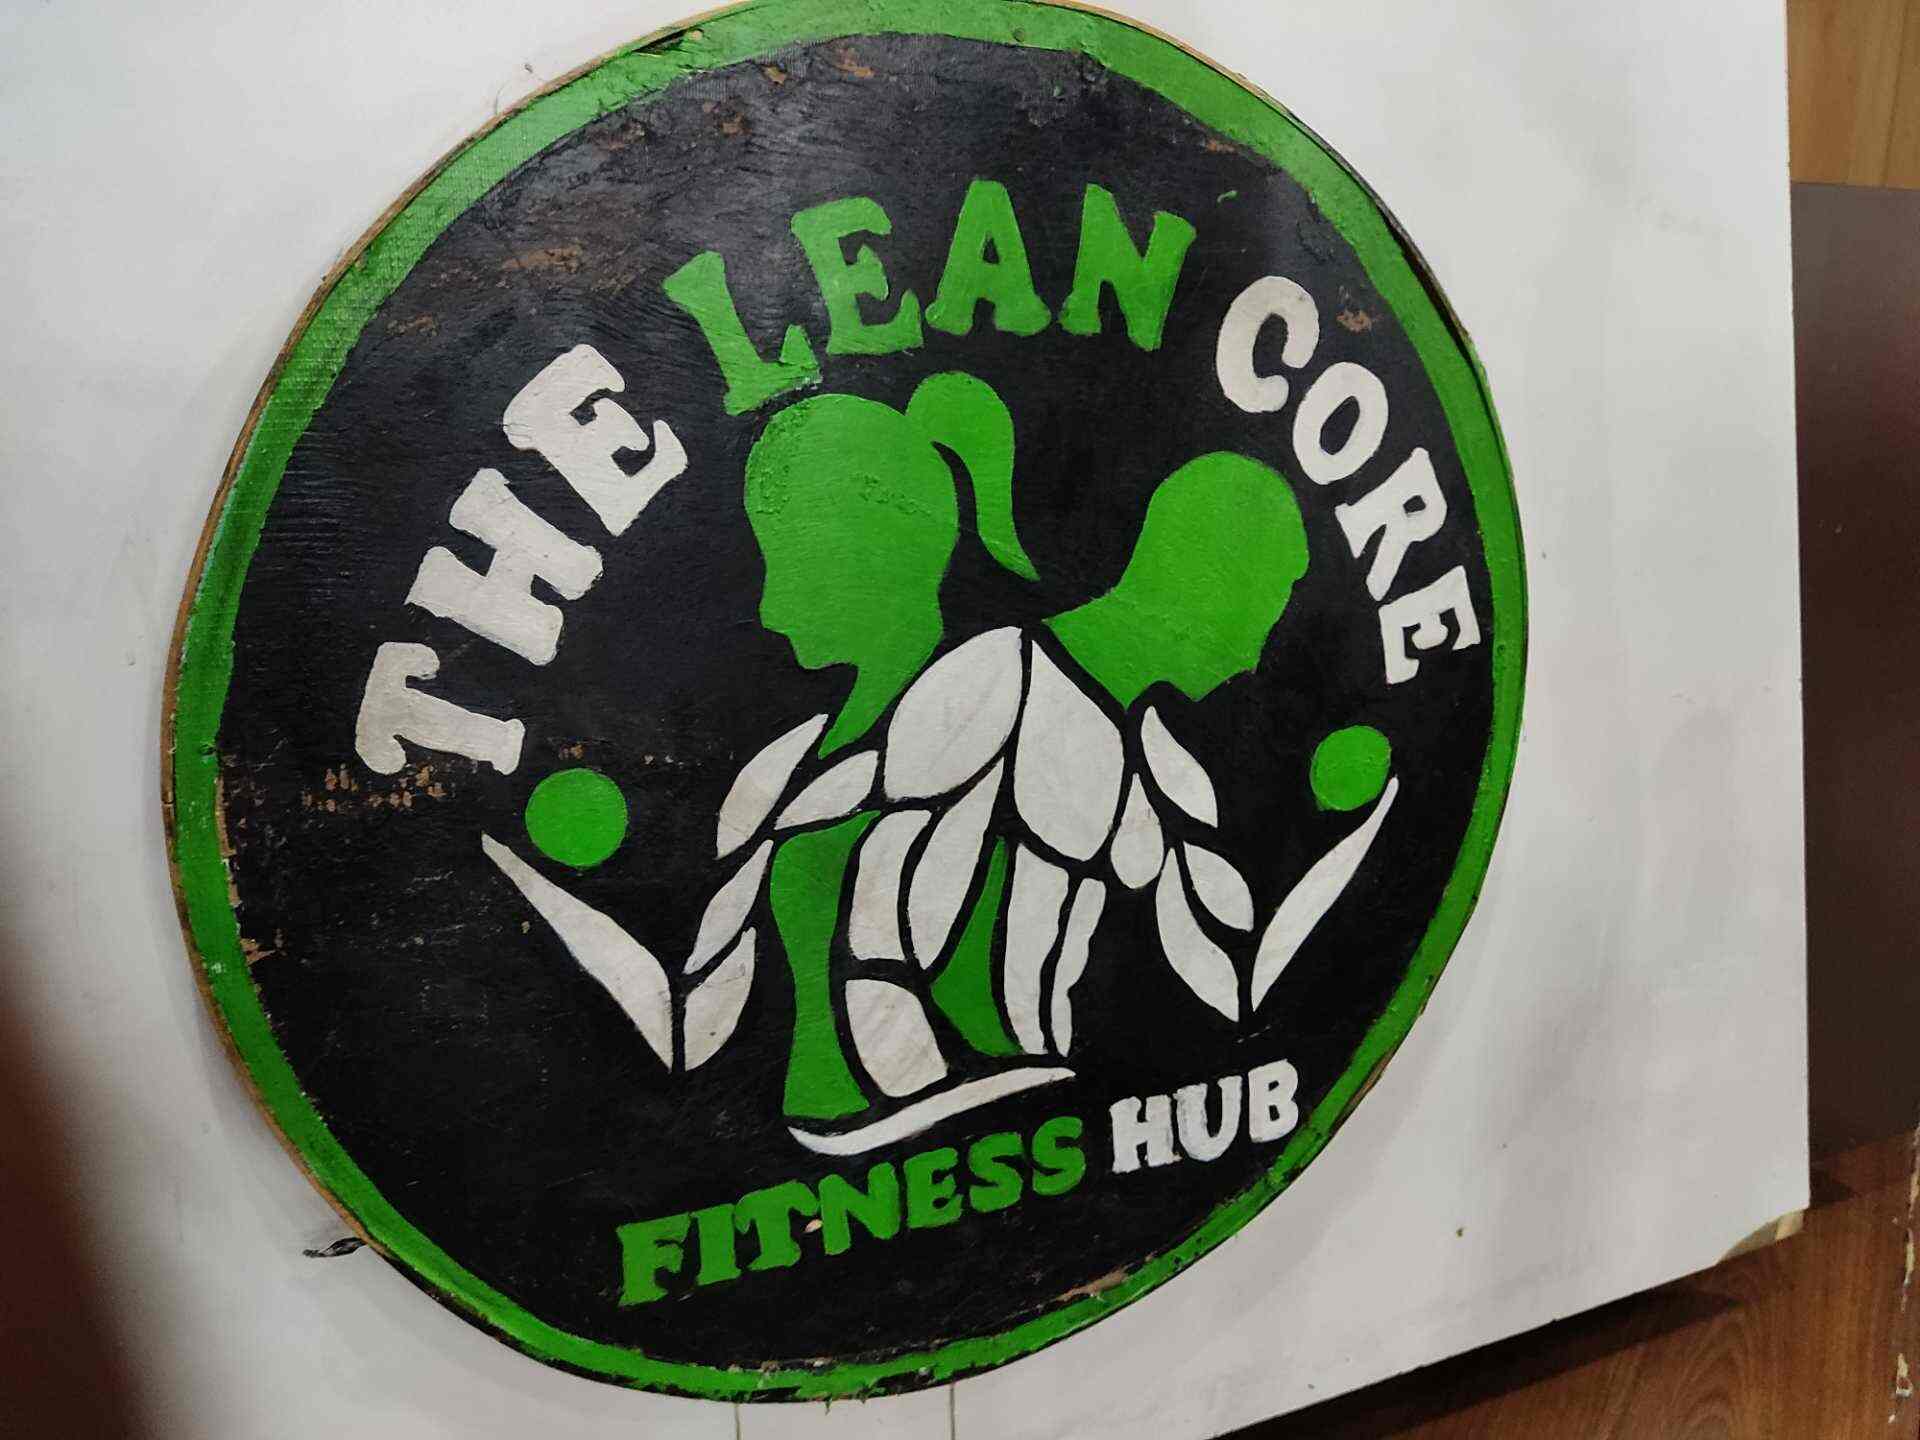 THE LEAN CORE FITNESS HUB